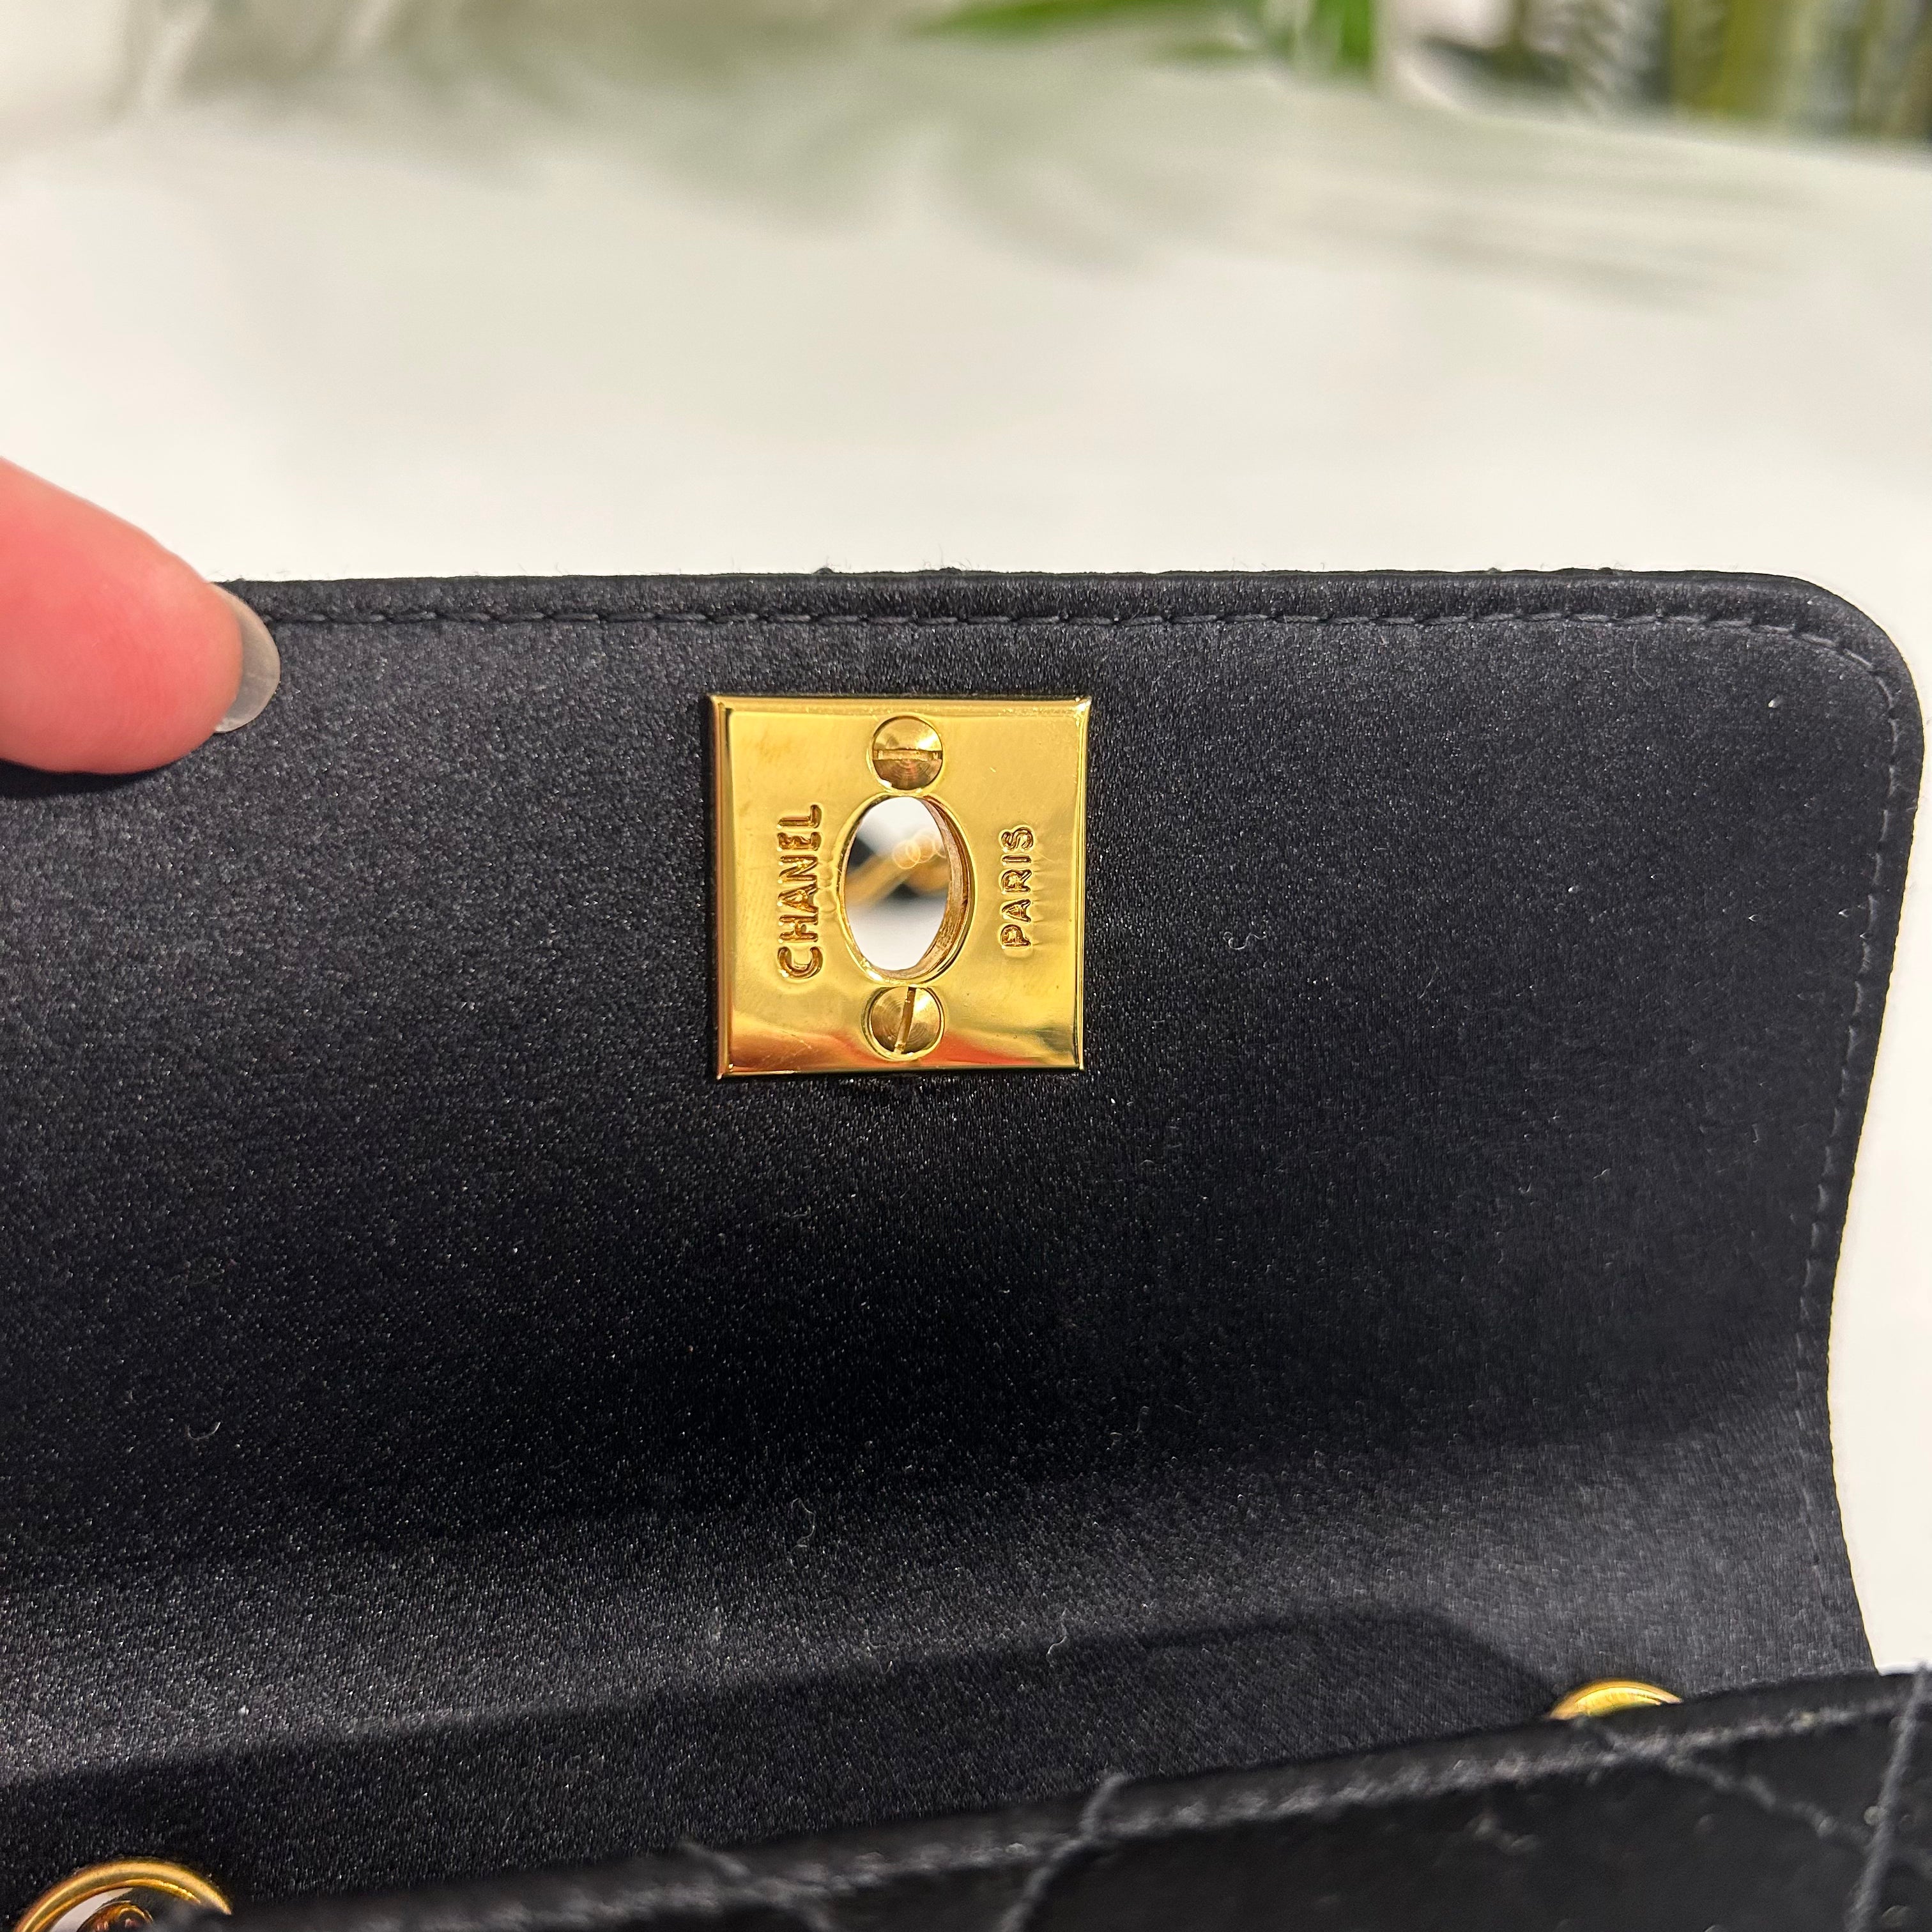 Owning a Piece of History: Vintage 1983 - 1984 (?) Chanel Single Flap Purse  from when Karl Lagerfeld started • Save. Spend. Splurge.